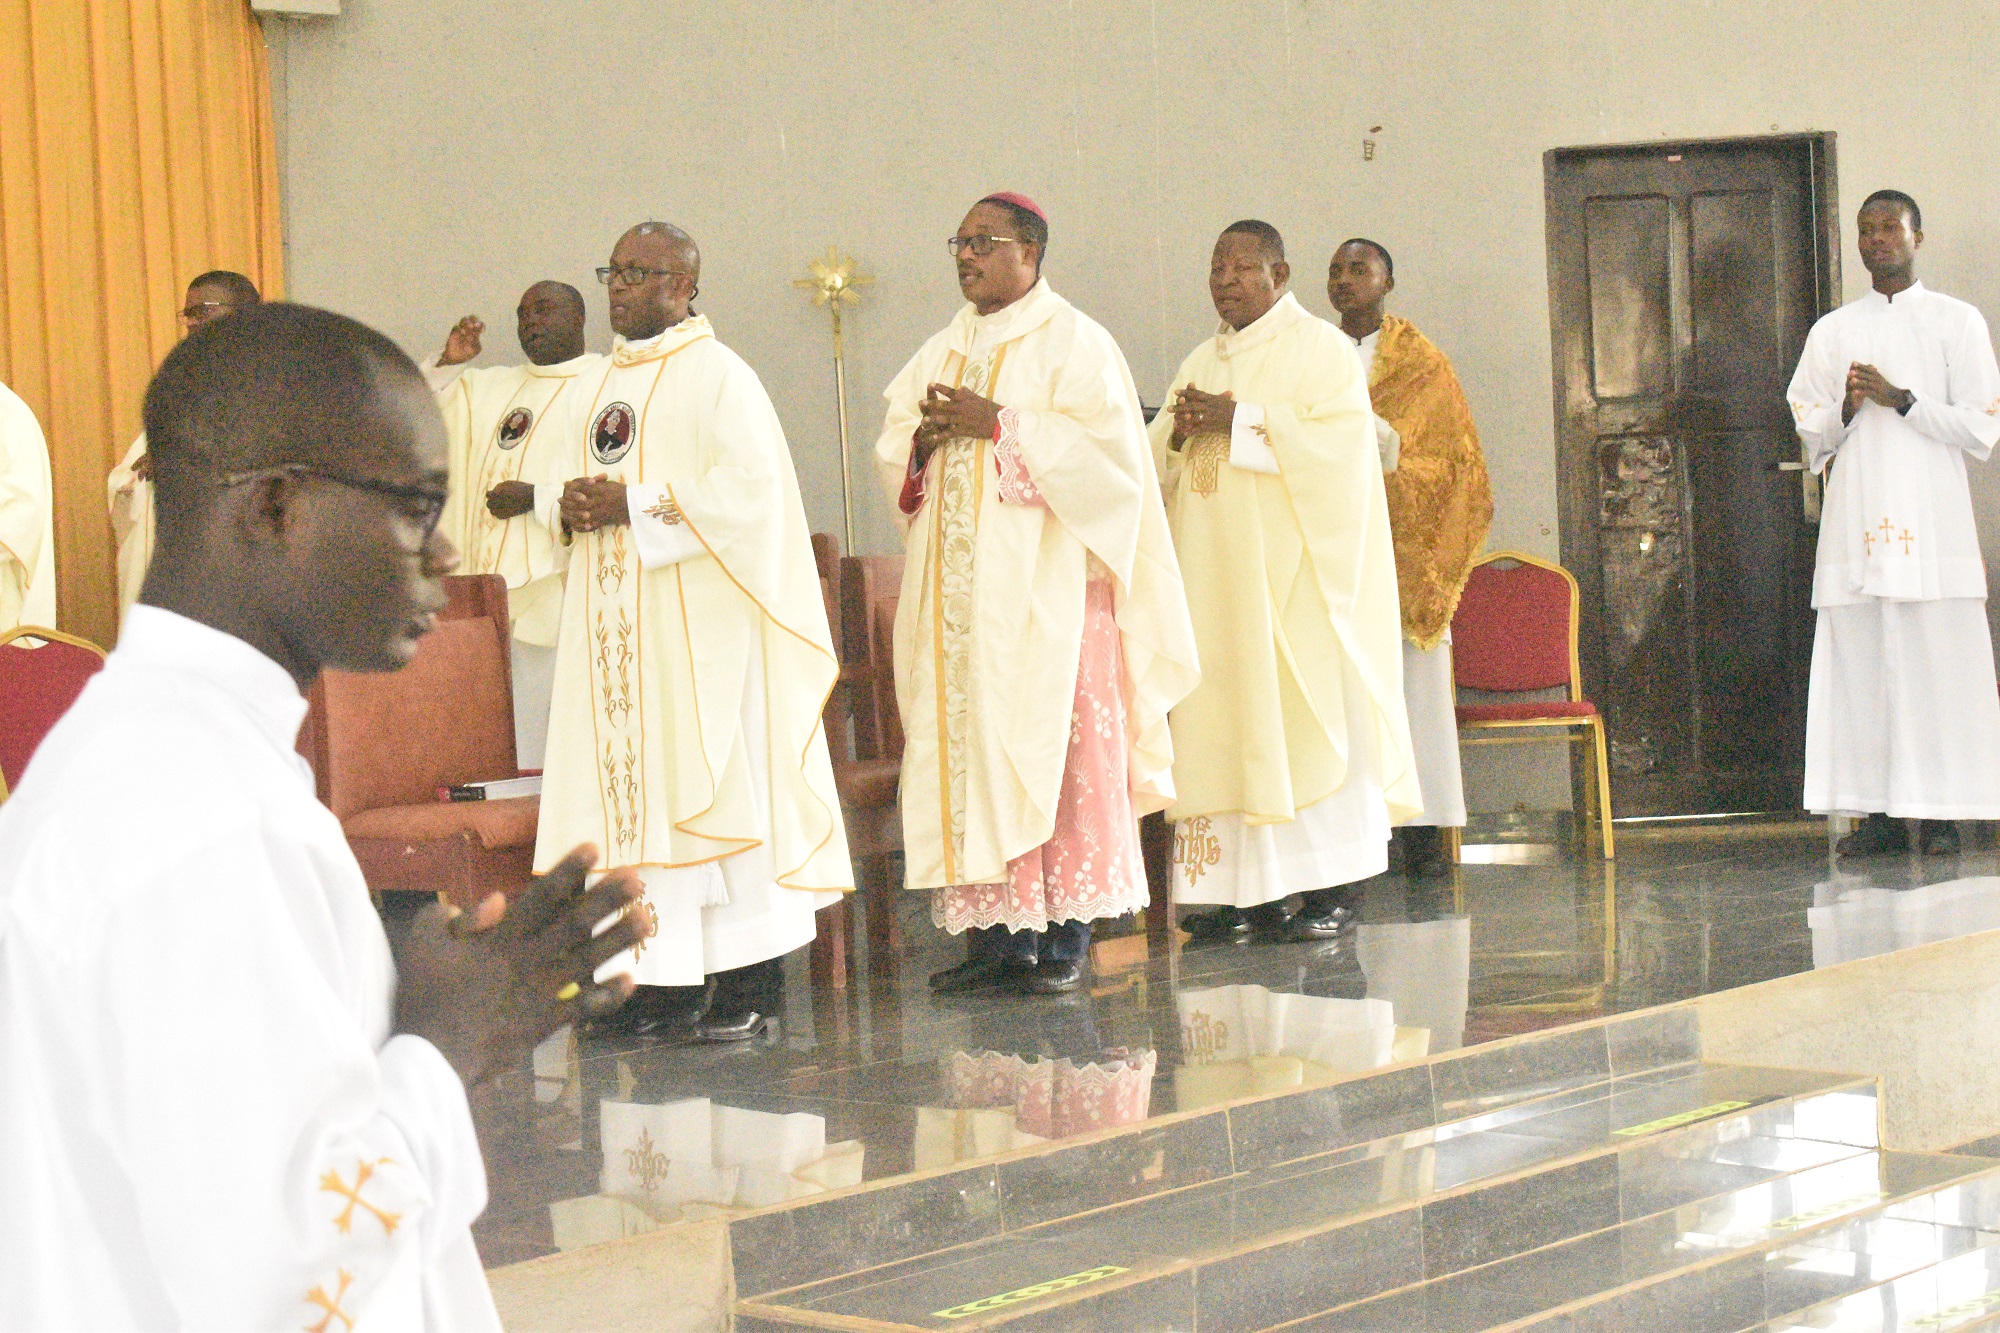 IT IS NOT WHAT YOU TAKE THAT MAKES YOU A SAINT! BISHOP ODETOYINBO NOTED